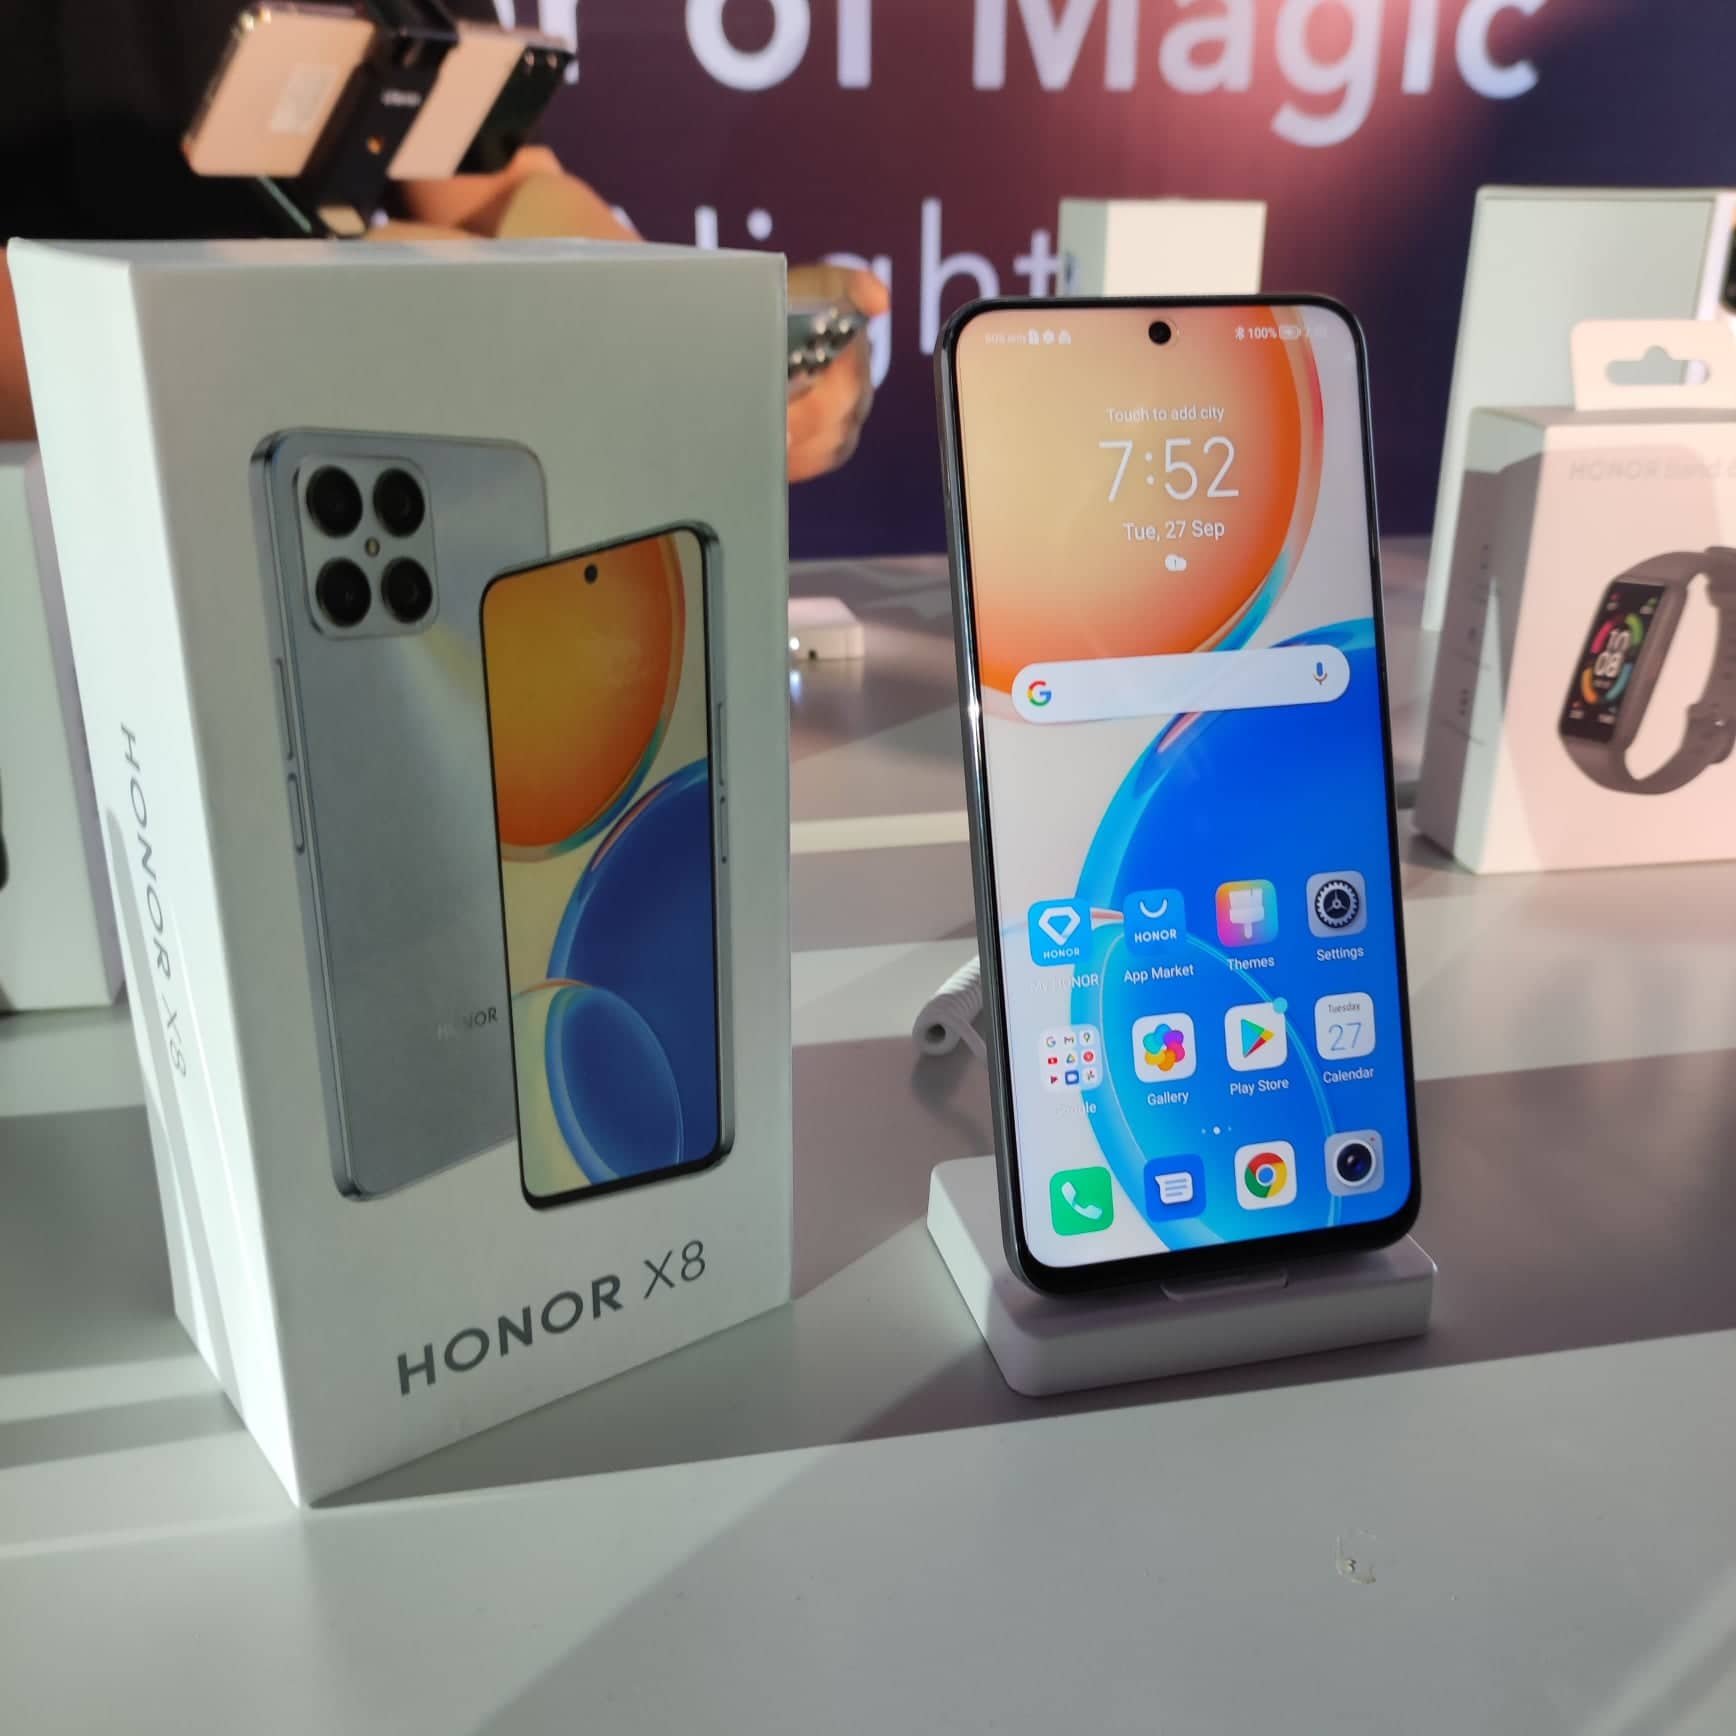 HONOR X Series: With eXtra Power, Performance, and Vision